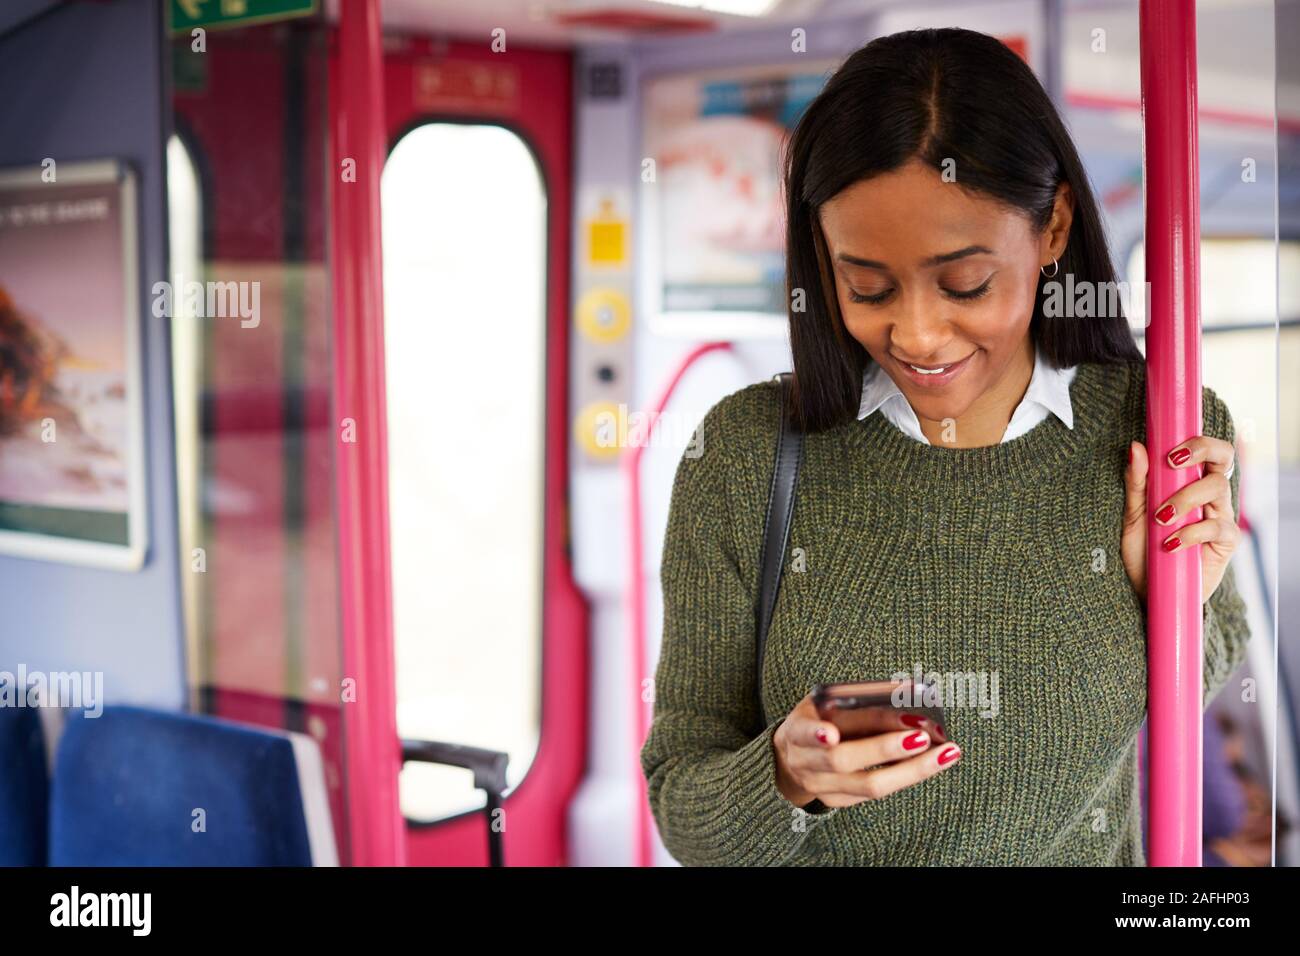 Female Passenger Standing By Doors In Train Looking At Mobile Phone Stock Photo